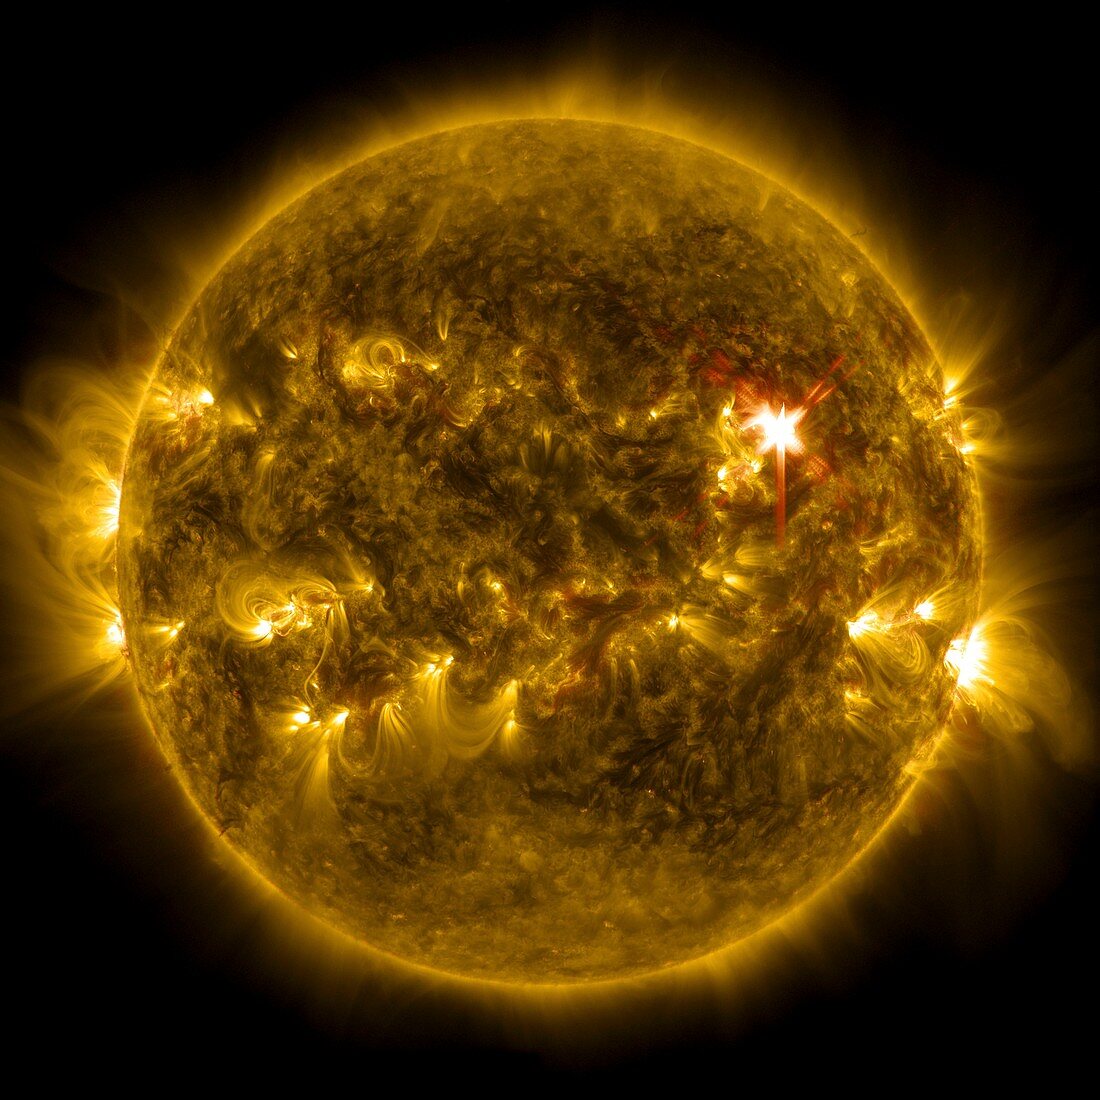 Sun and X1 solar flare,ultraviolet image